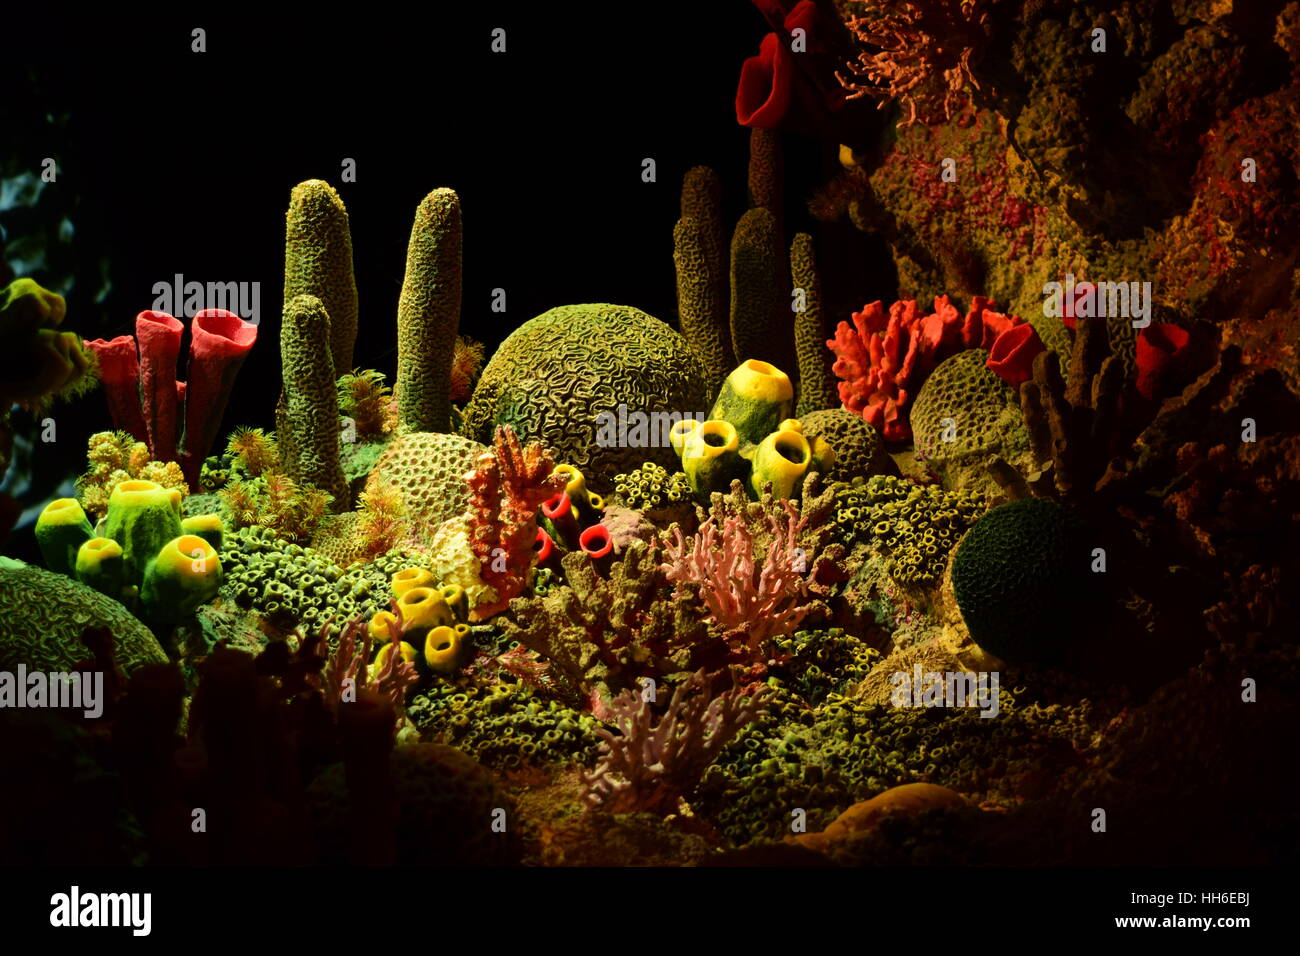 this is a still of a imitation coral reef. Stock Photo